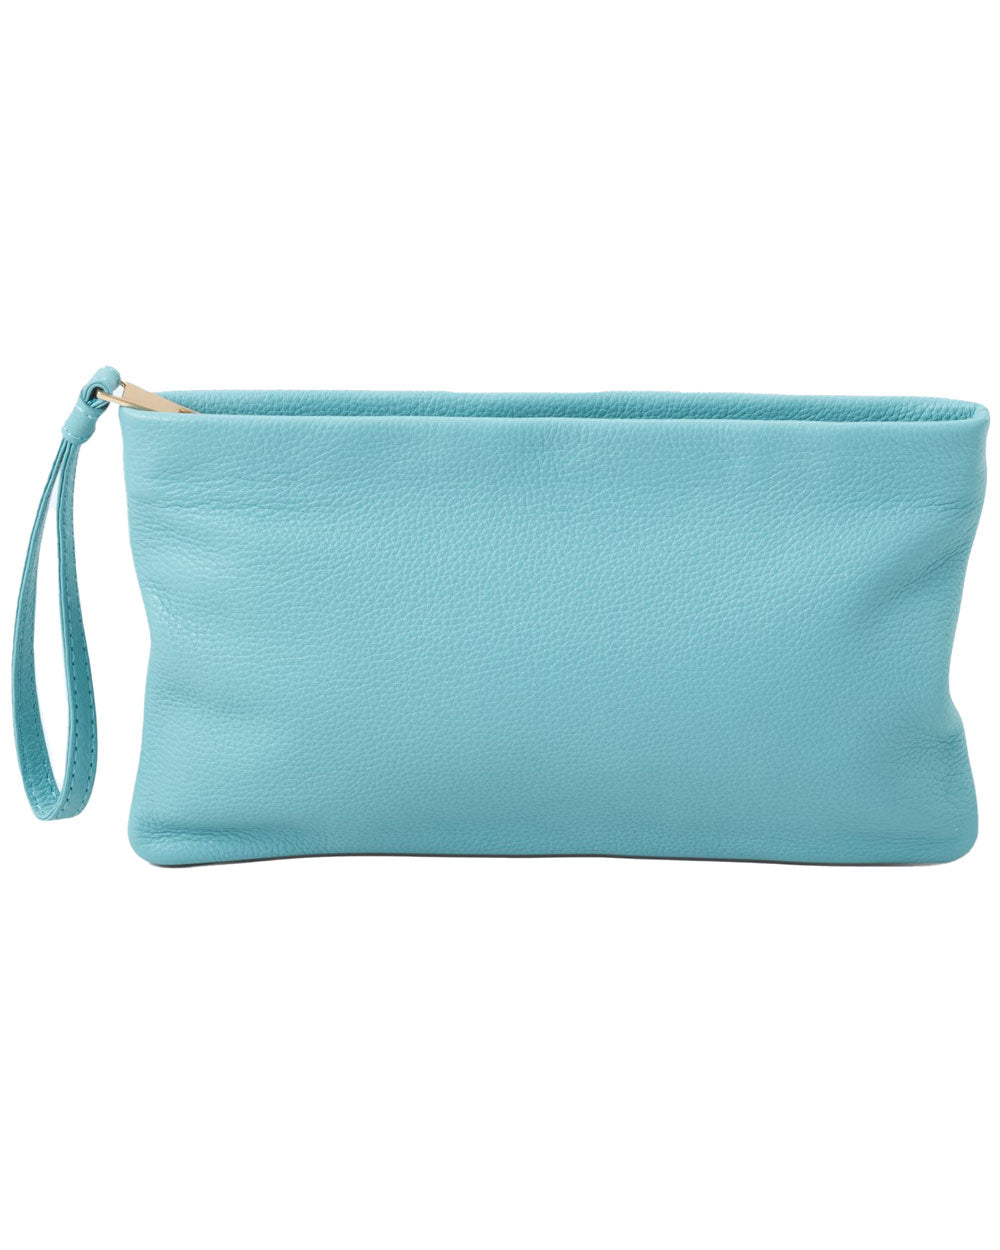 Alexis Pouch in Azure